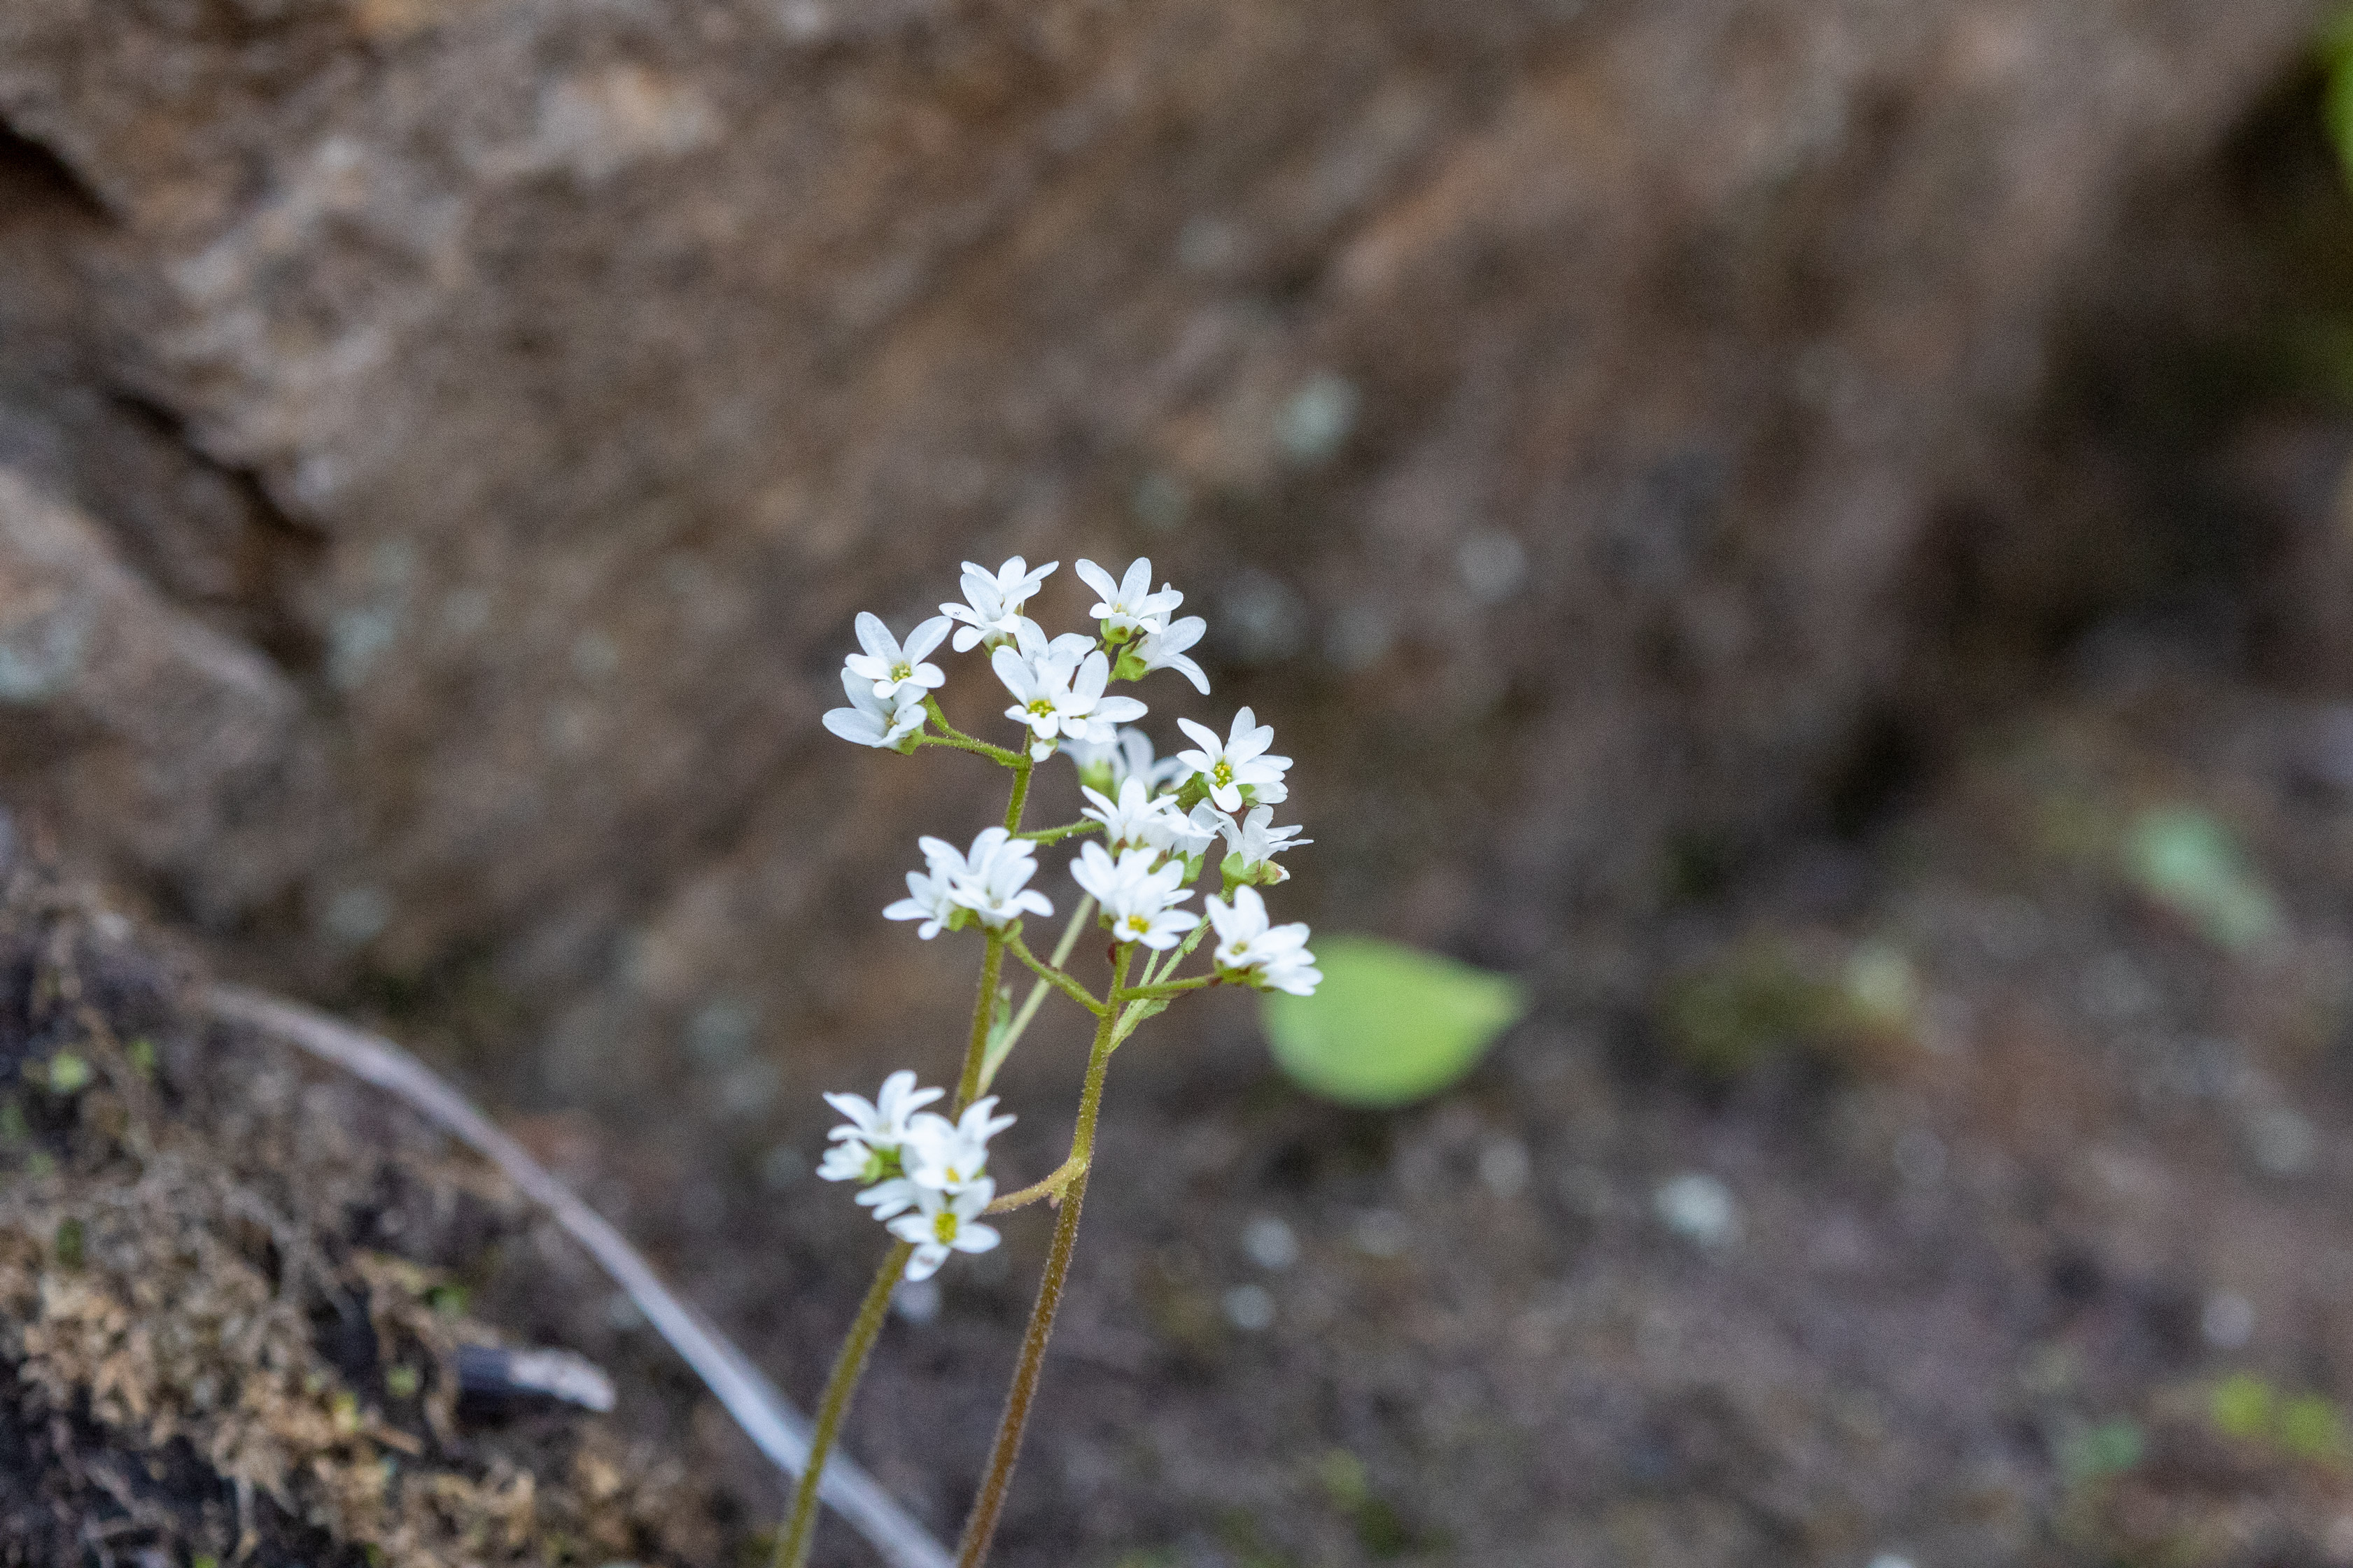 Small white flowers on the forest floor